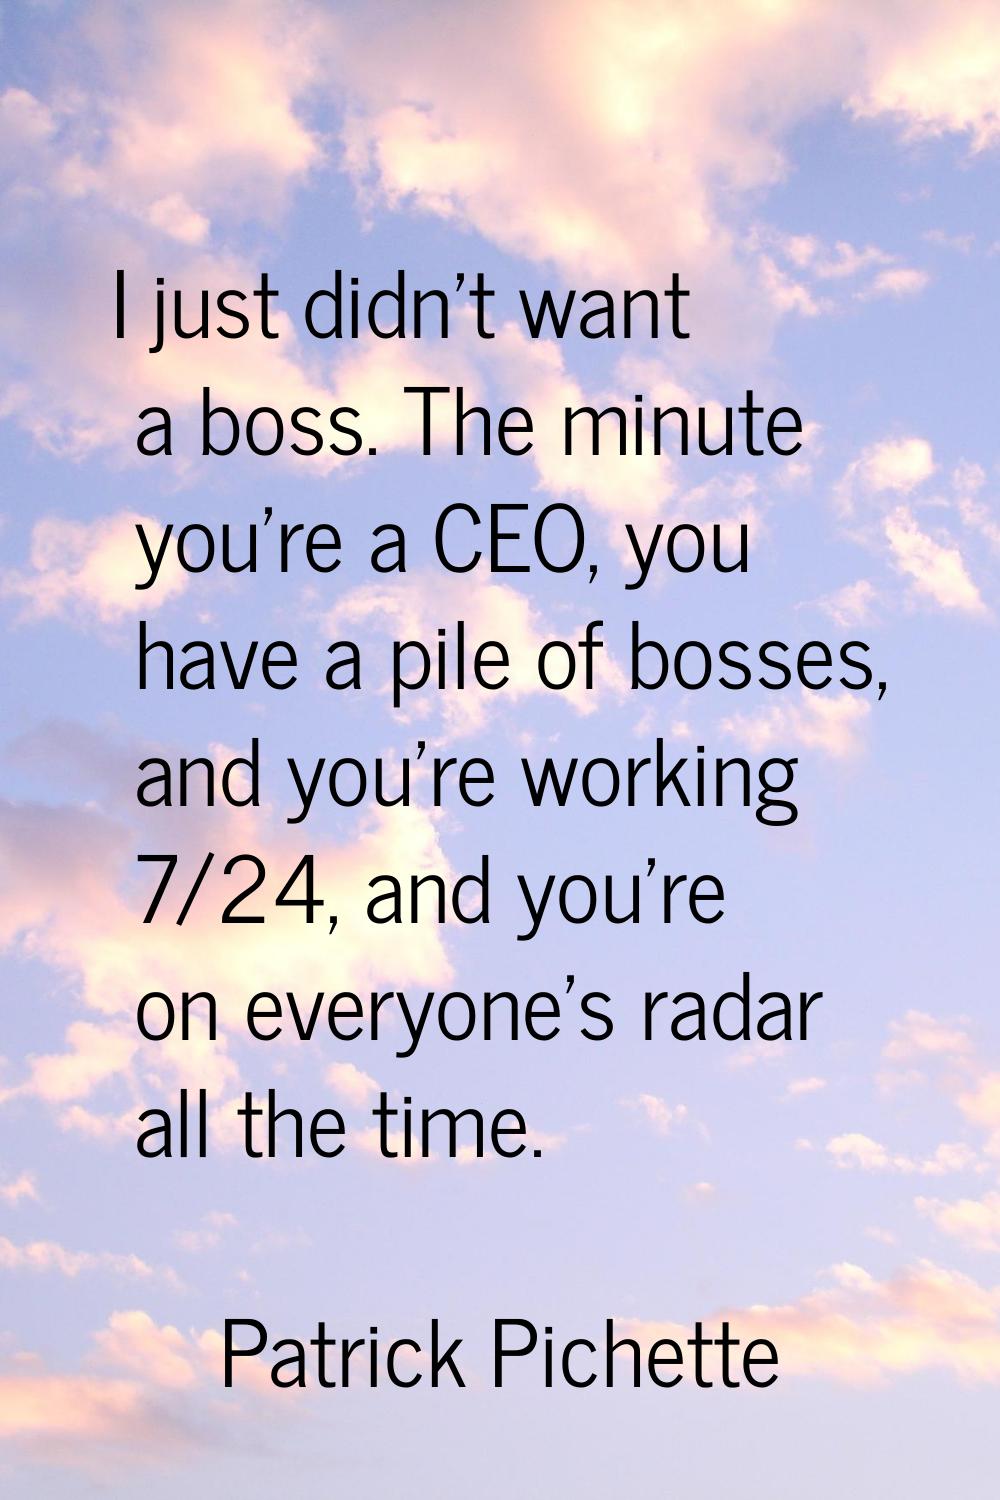 I just didn't want a boss. The minute you're a CEO, you have a pile of bosses, and you're working 7